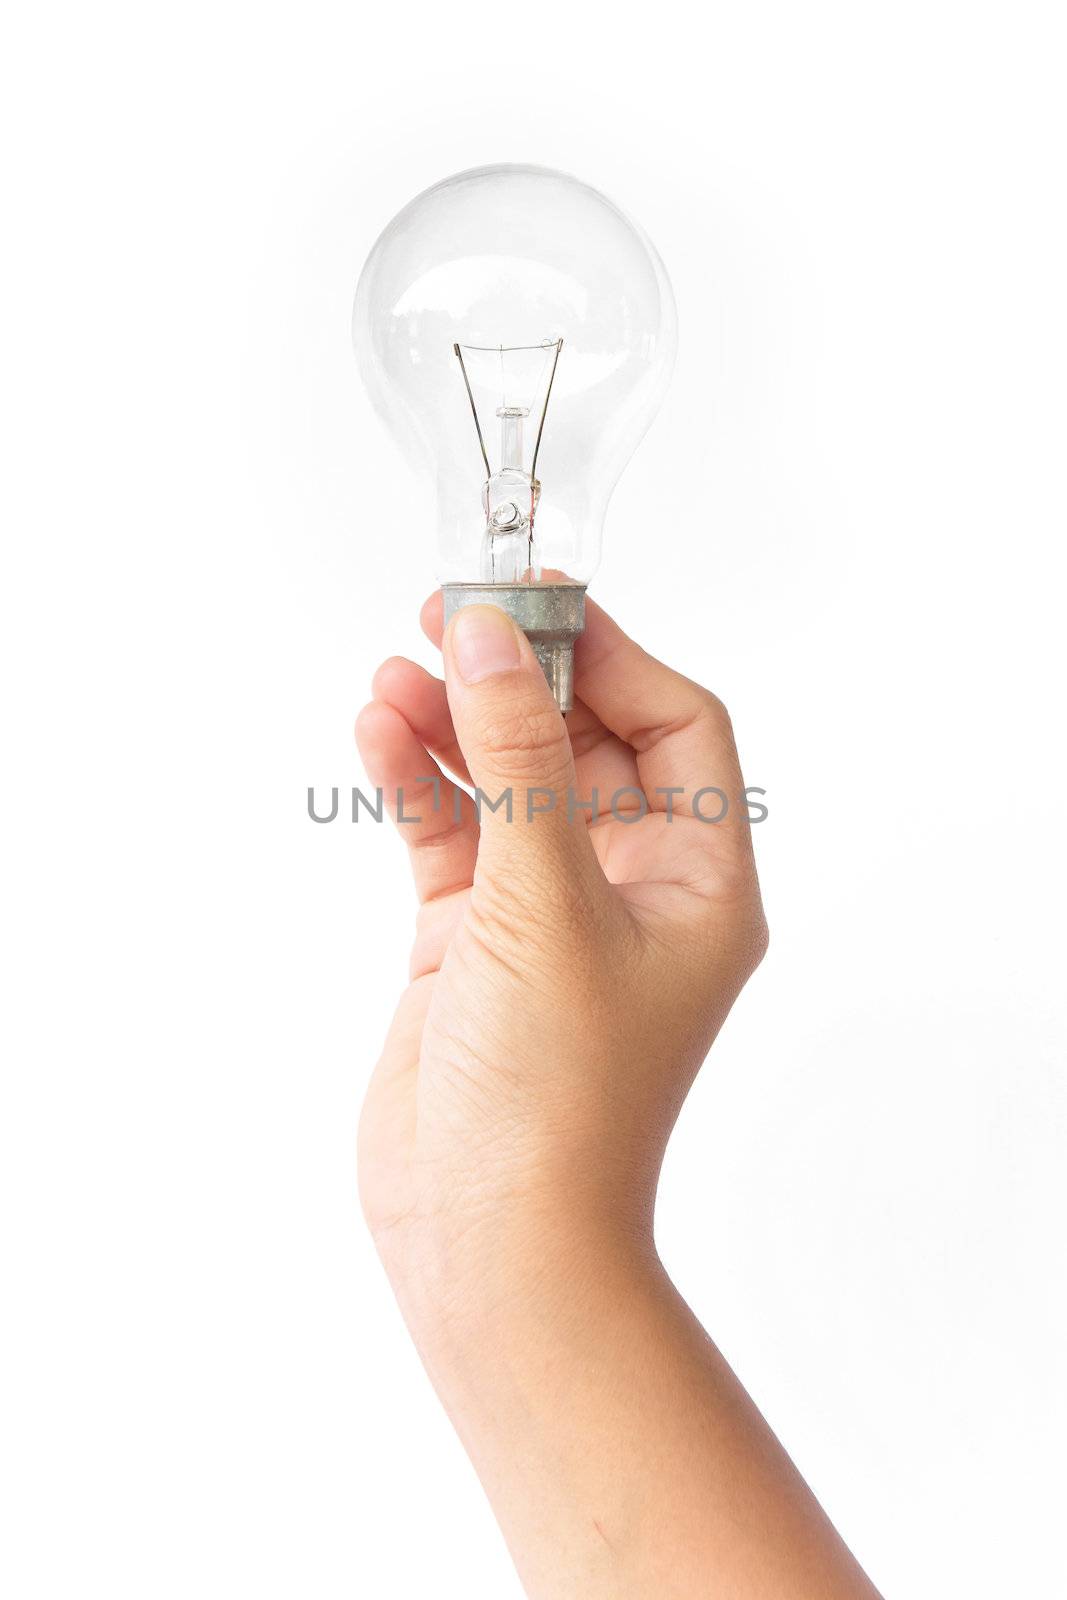 light blub in hand ,isolated on white background